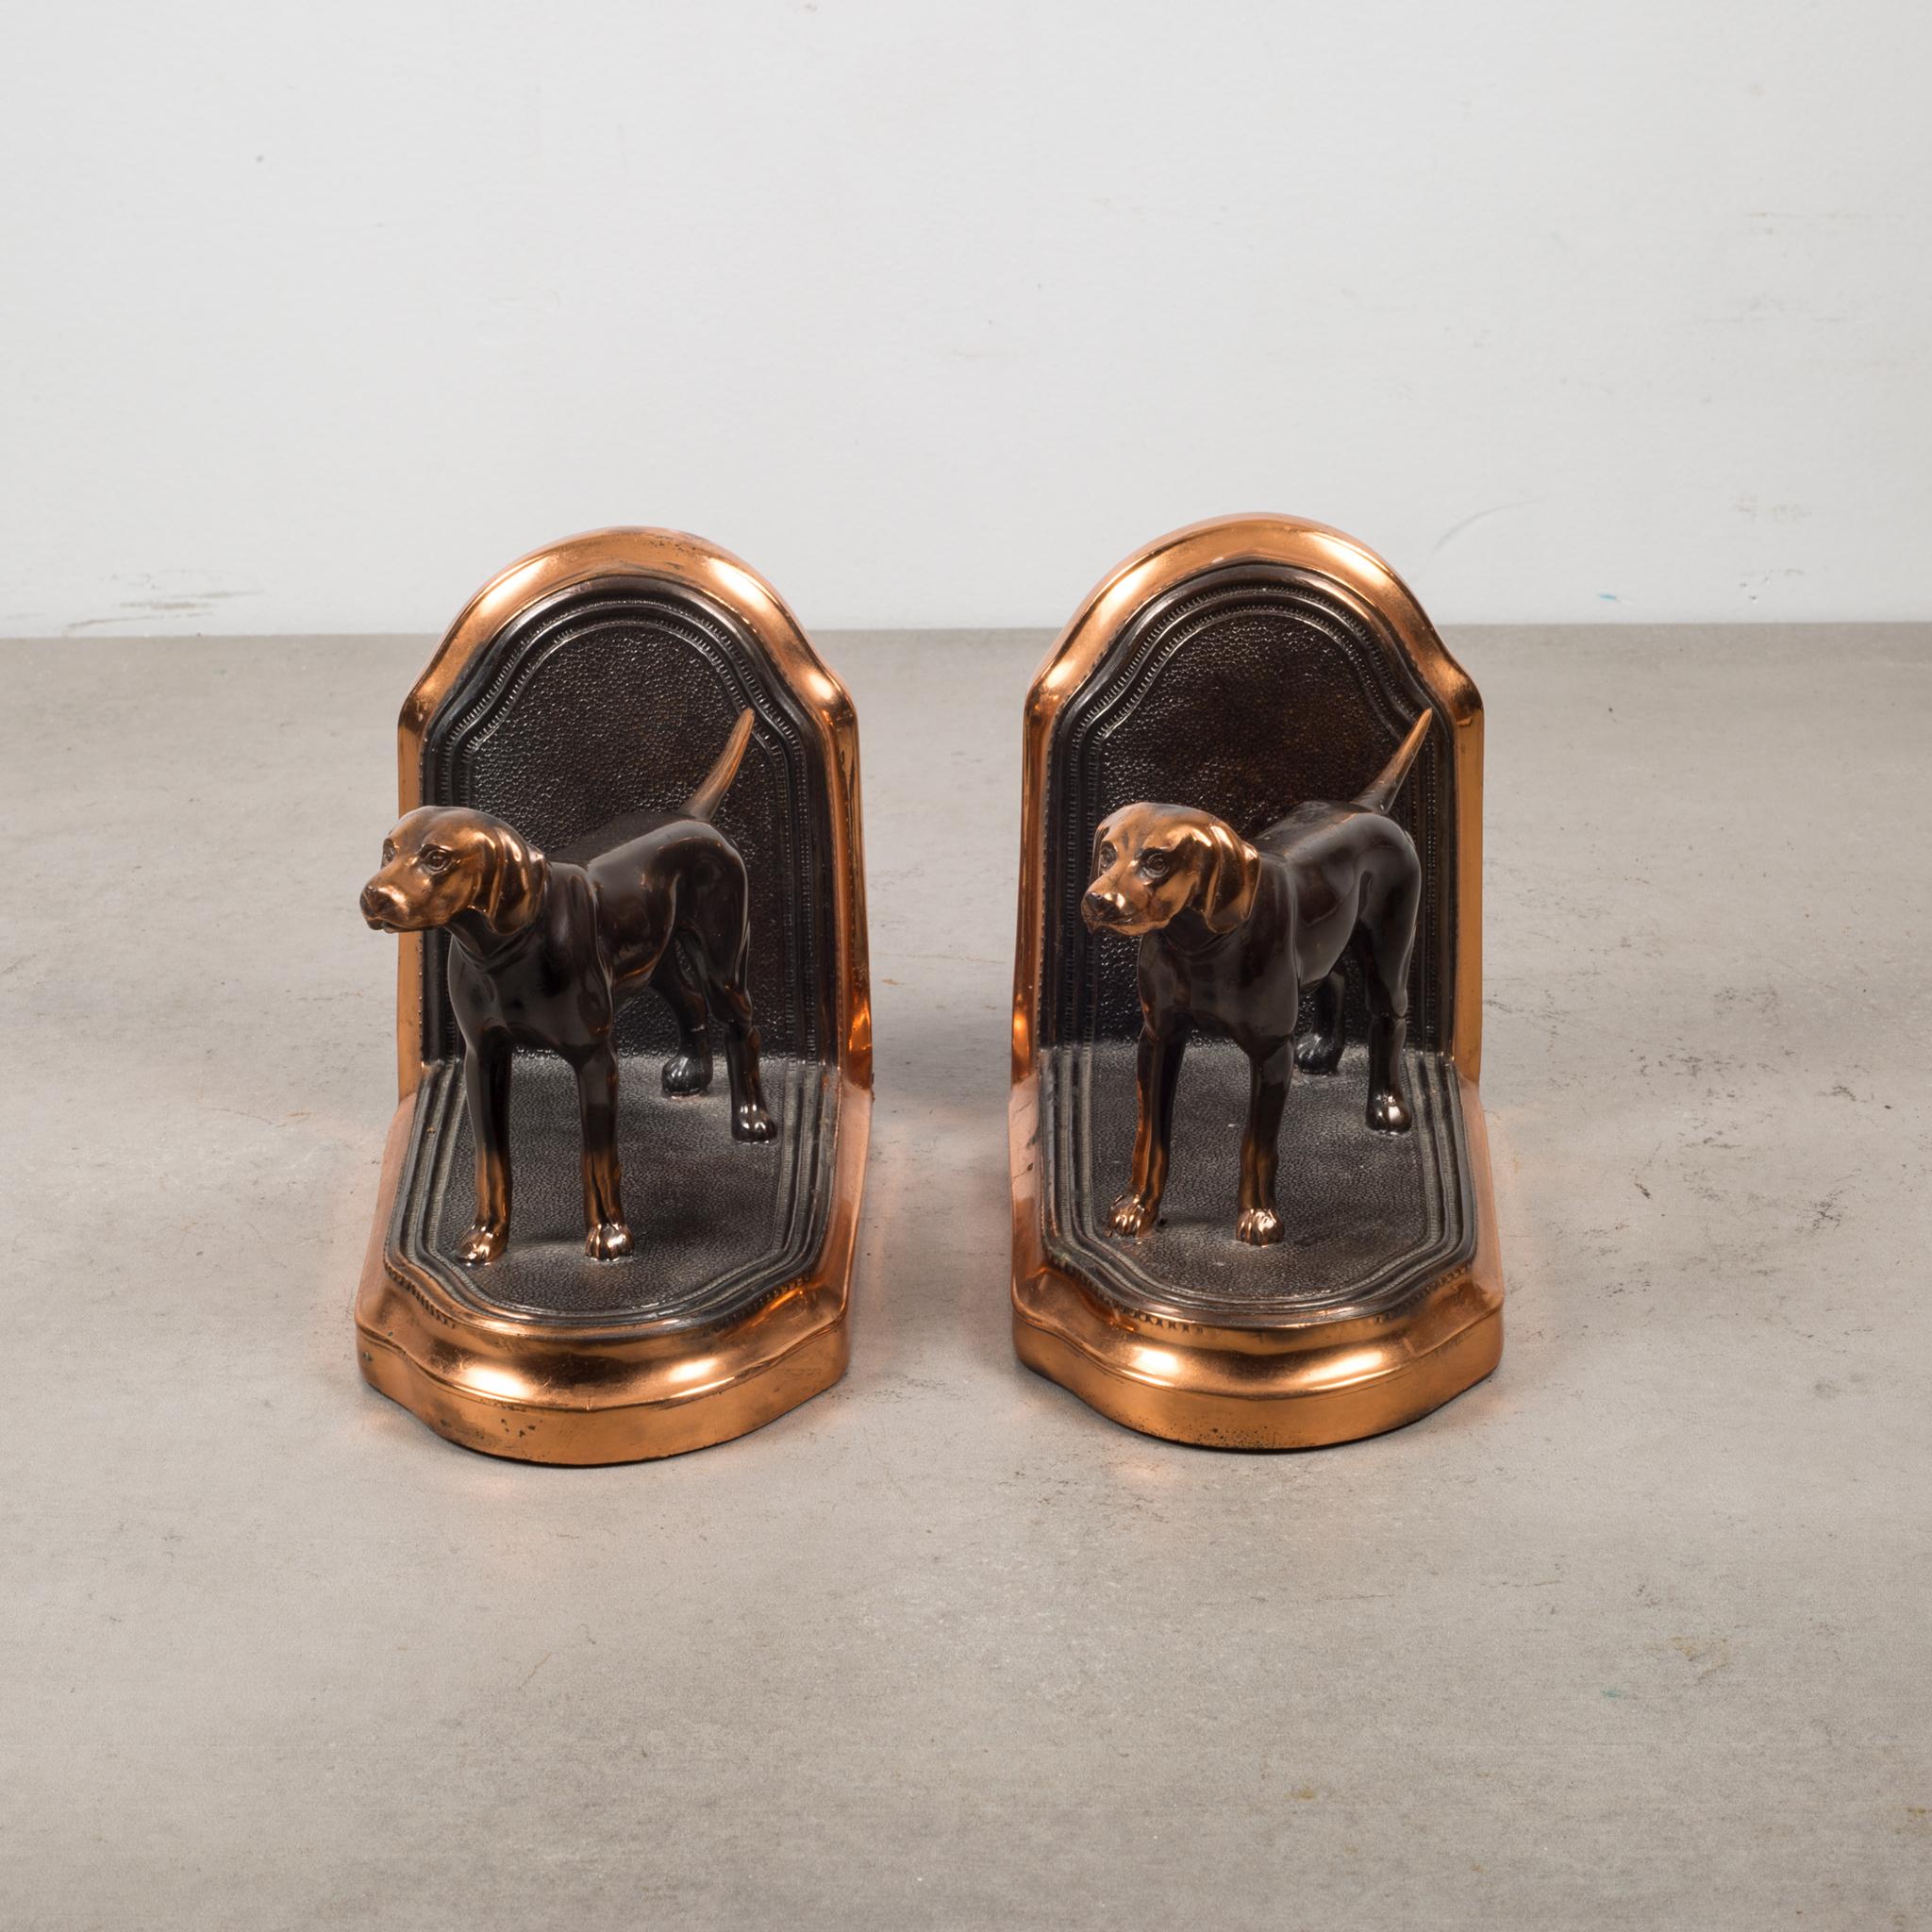 Industrial Copper-Plated Pointer Dog Bookends, circa 1940